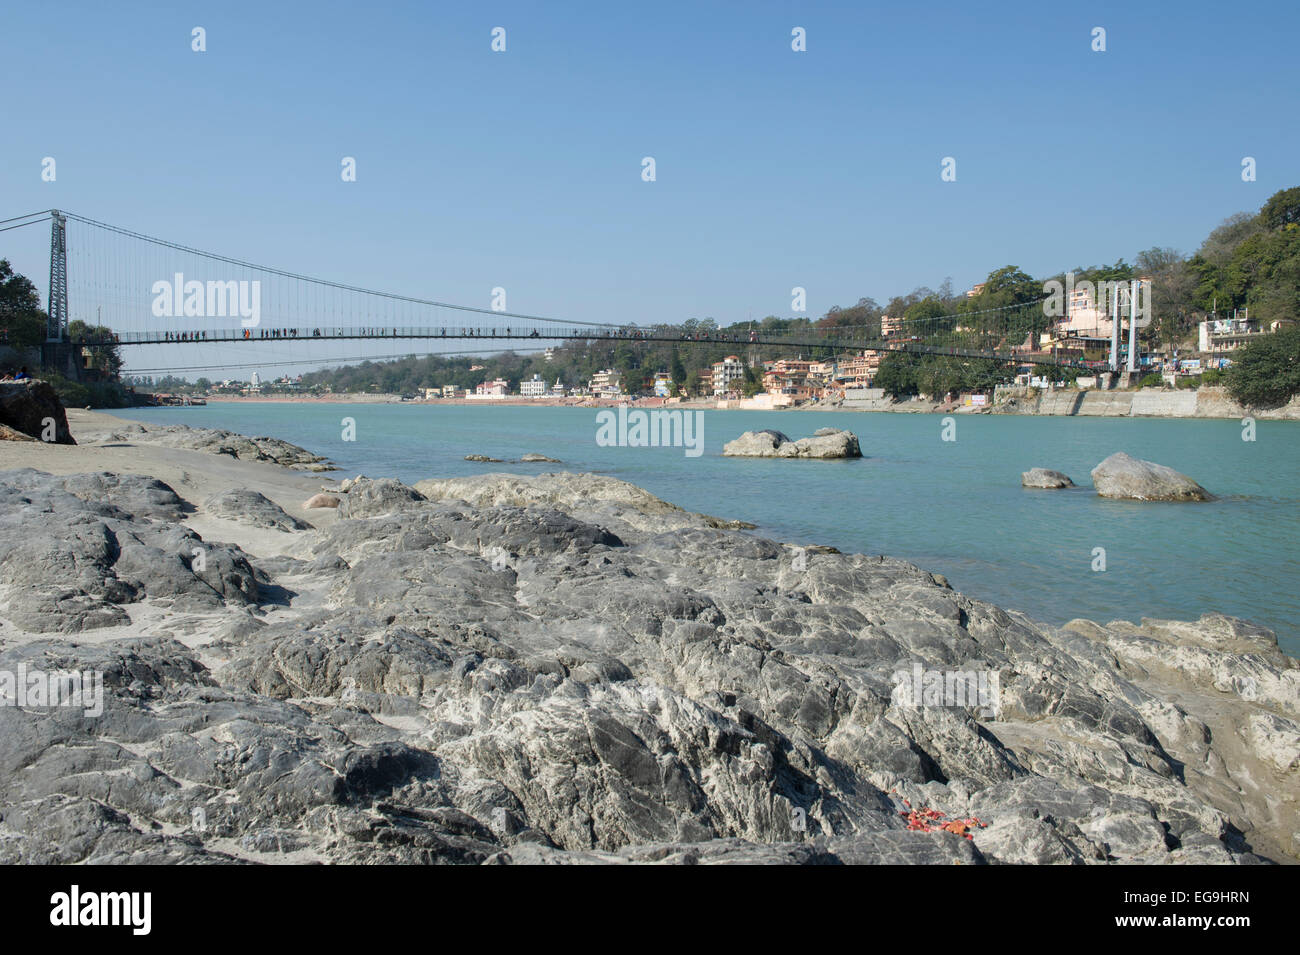 A rocky section of beach in Rishikesh with Ram Jhula bridge in the background which crosses the Ganges or Ganga river. Stock Photo